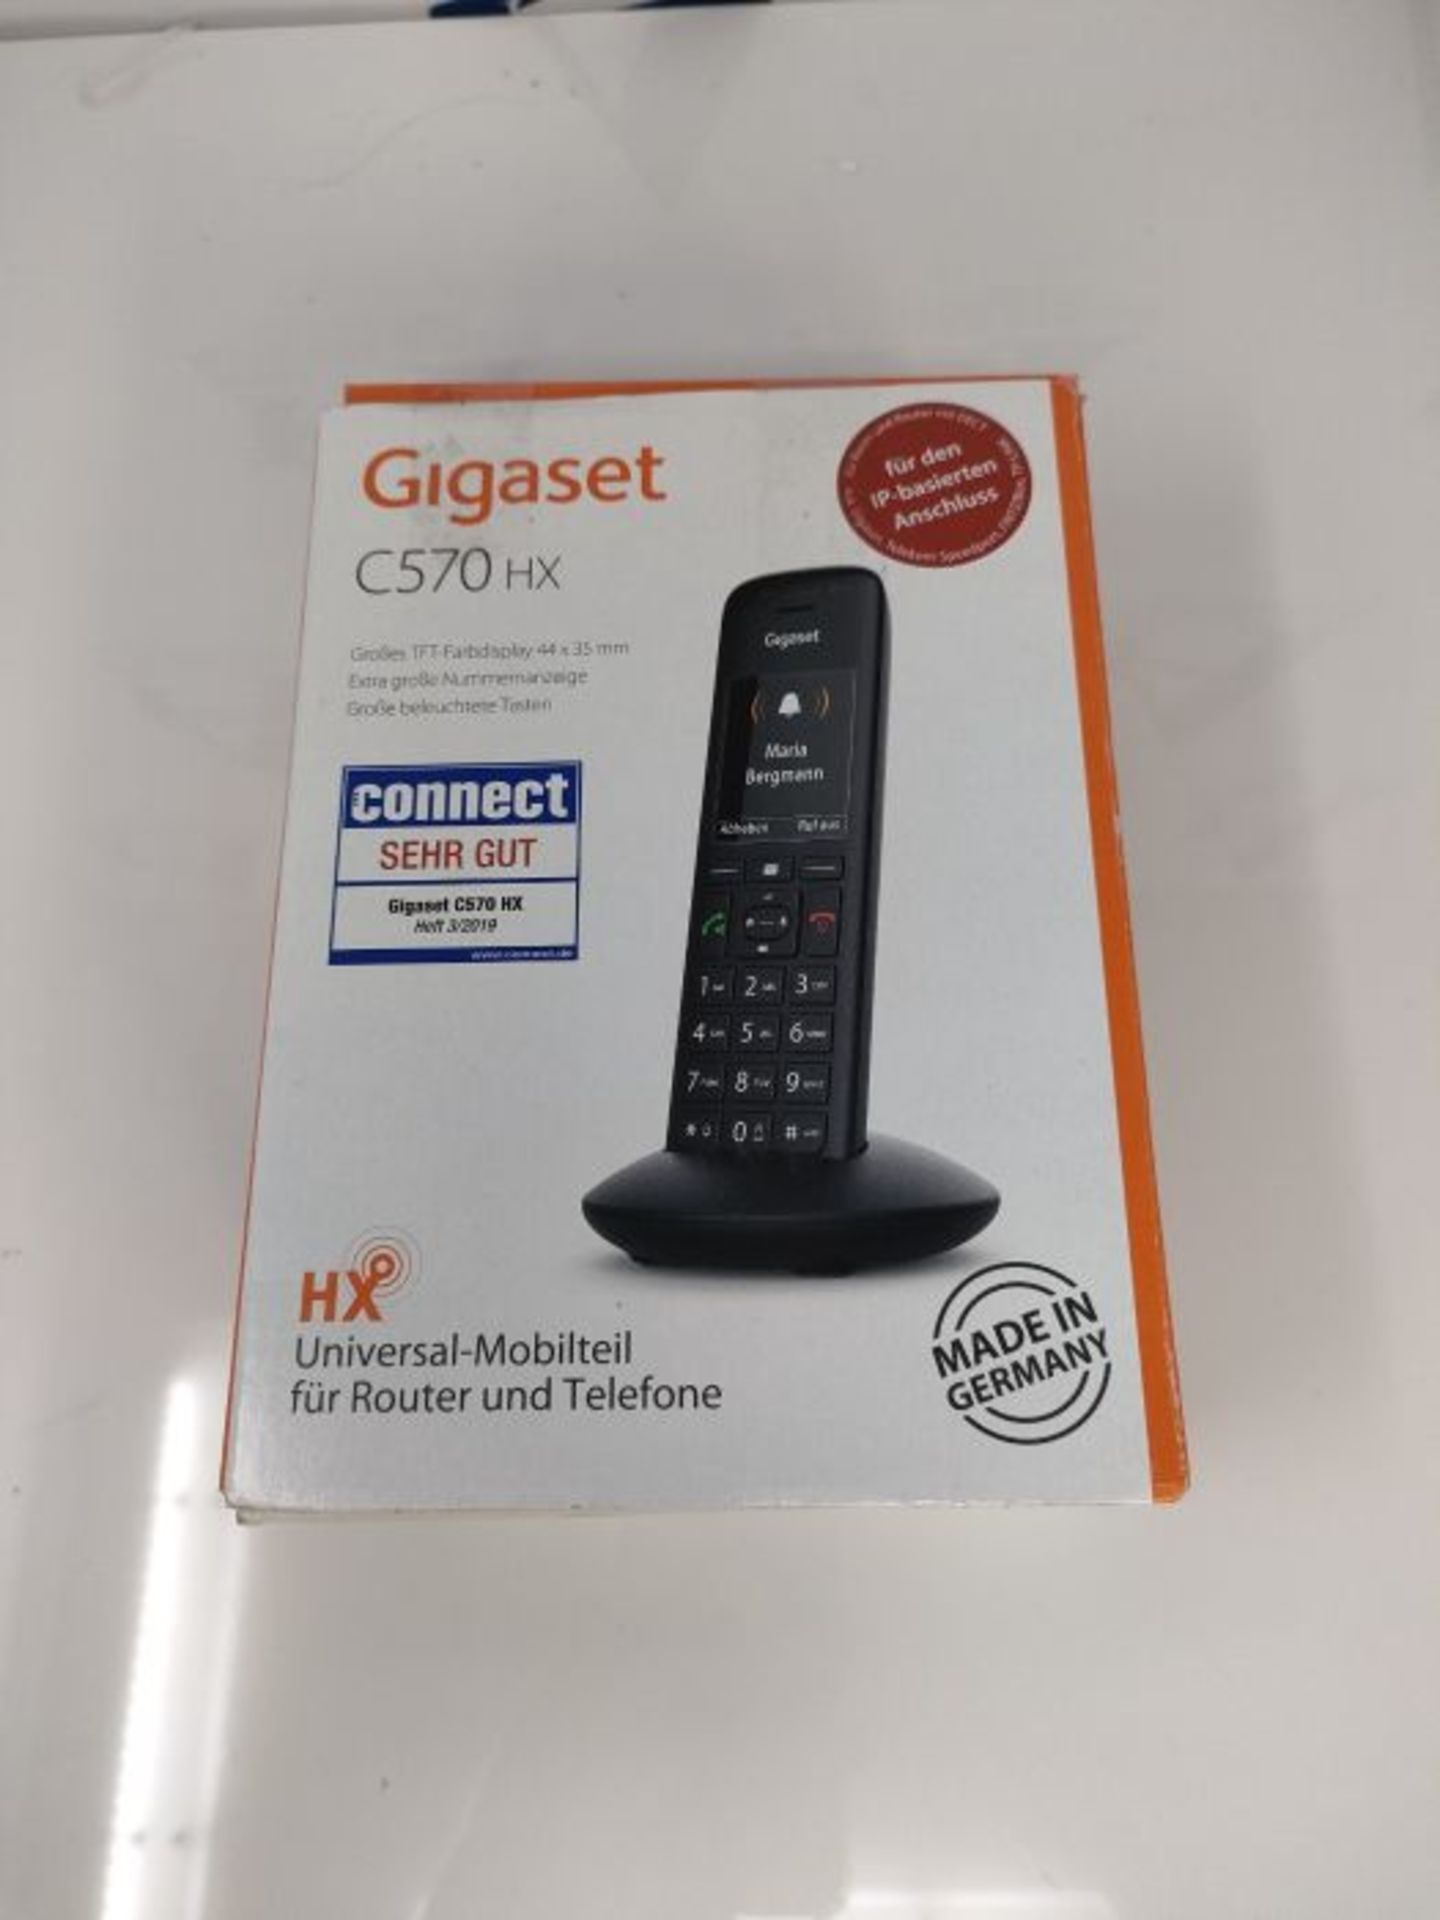 Gigaset C570HX - cordless DECT telephone for routers - Fritzbox, Speedport compatible - Image 2 of 3